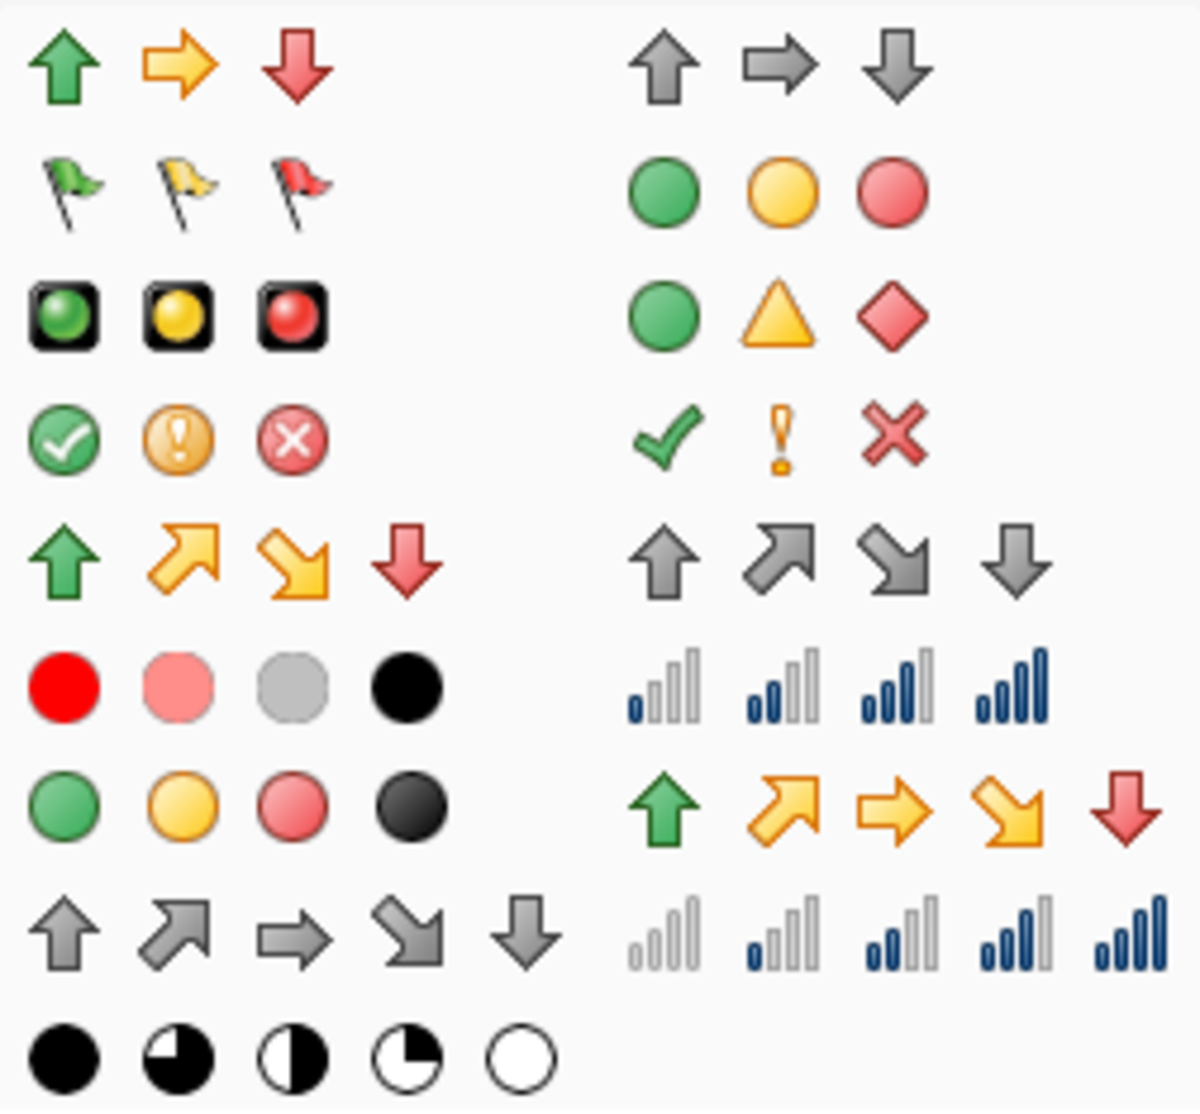 Examples of the Icon Sets available in Excel 2007 and Excel 2010.